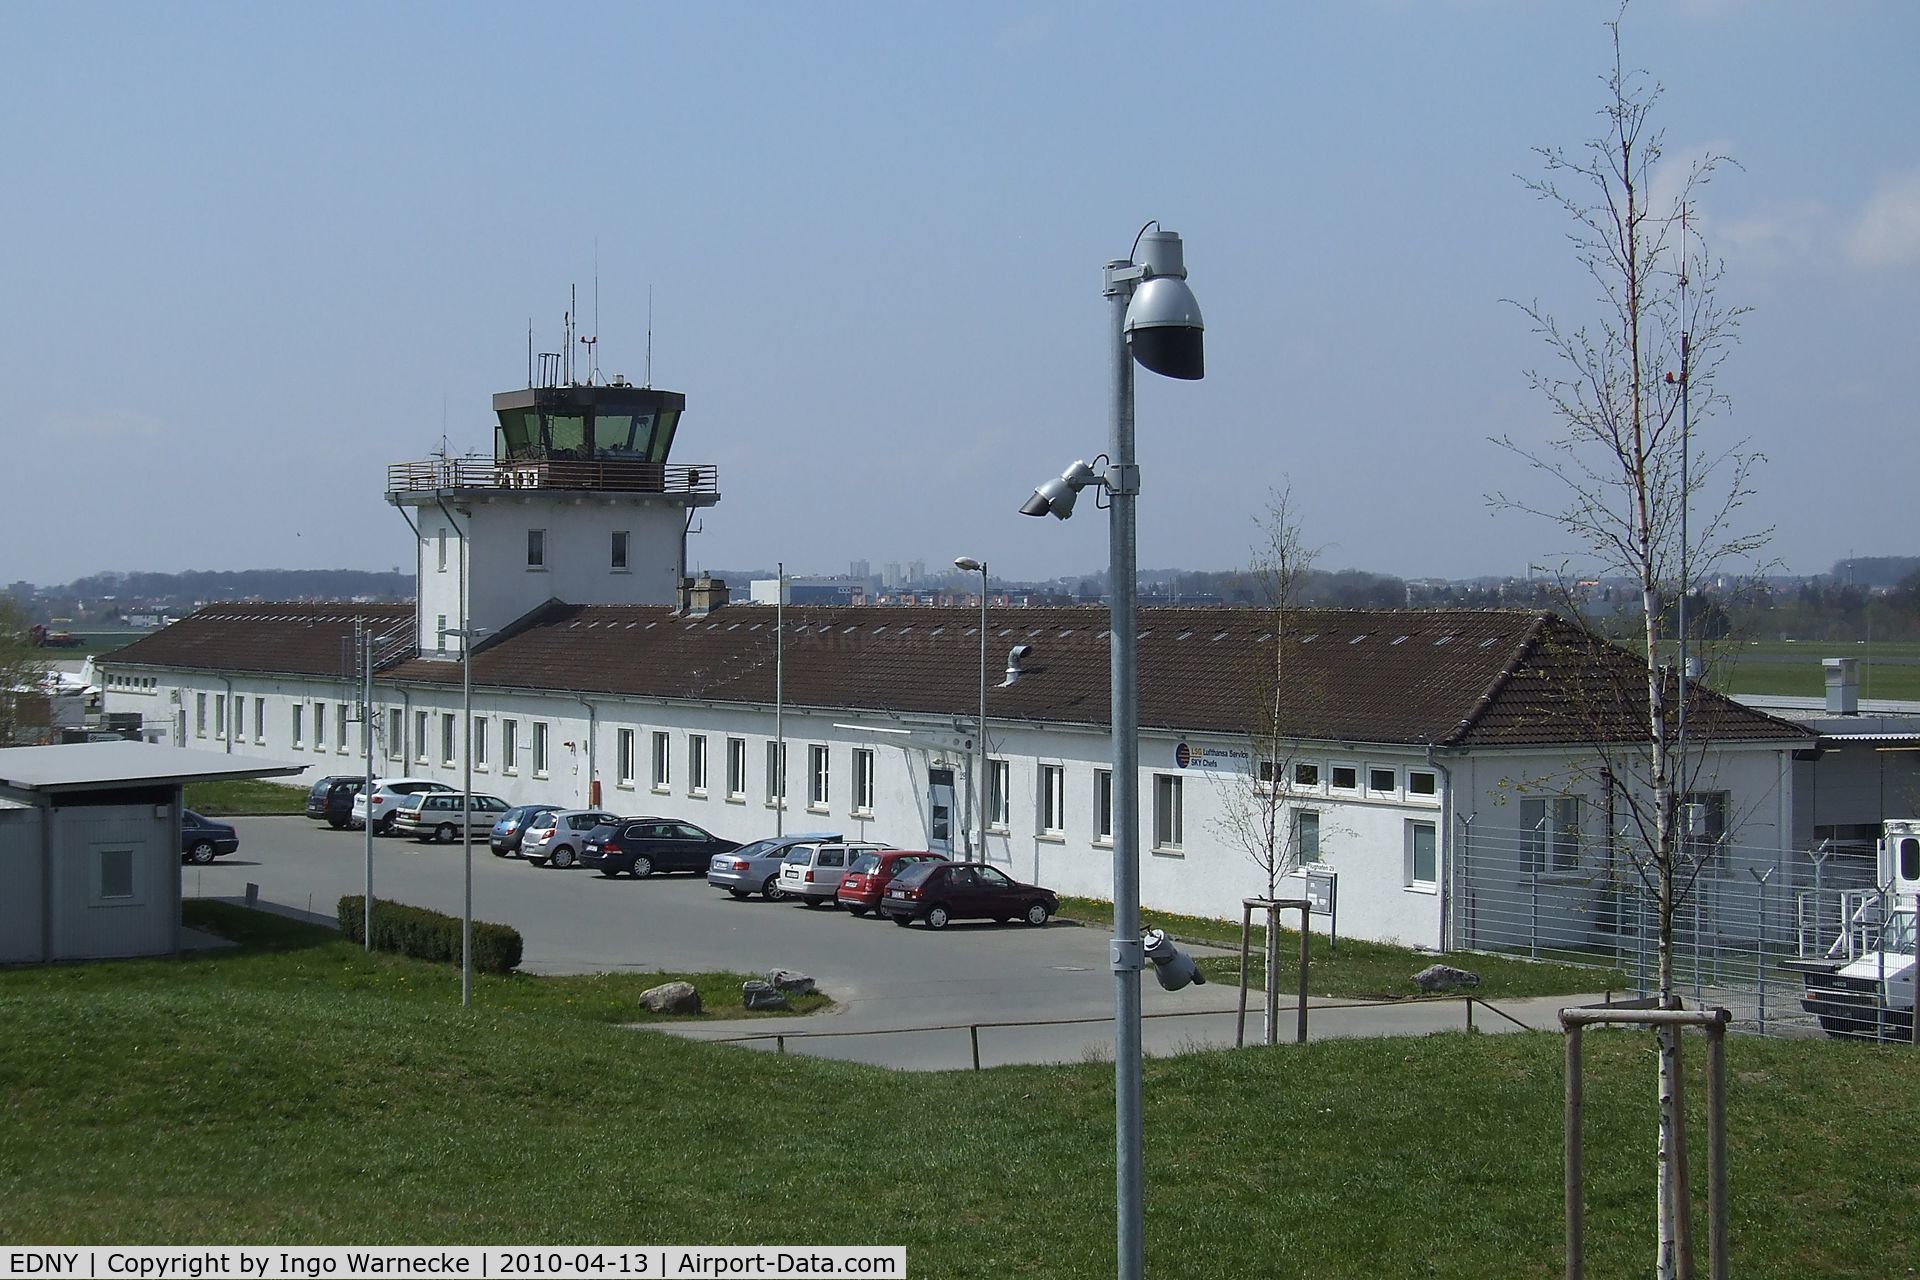 Bodensee Airport, Friedrichshafen Germany (EDNY) - the old terminal and tower